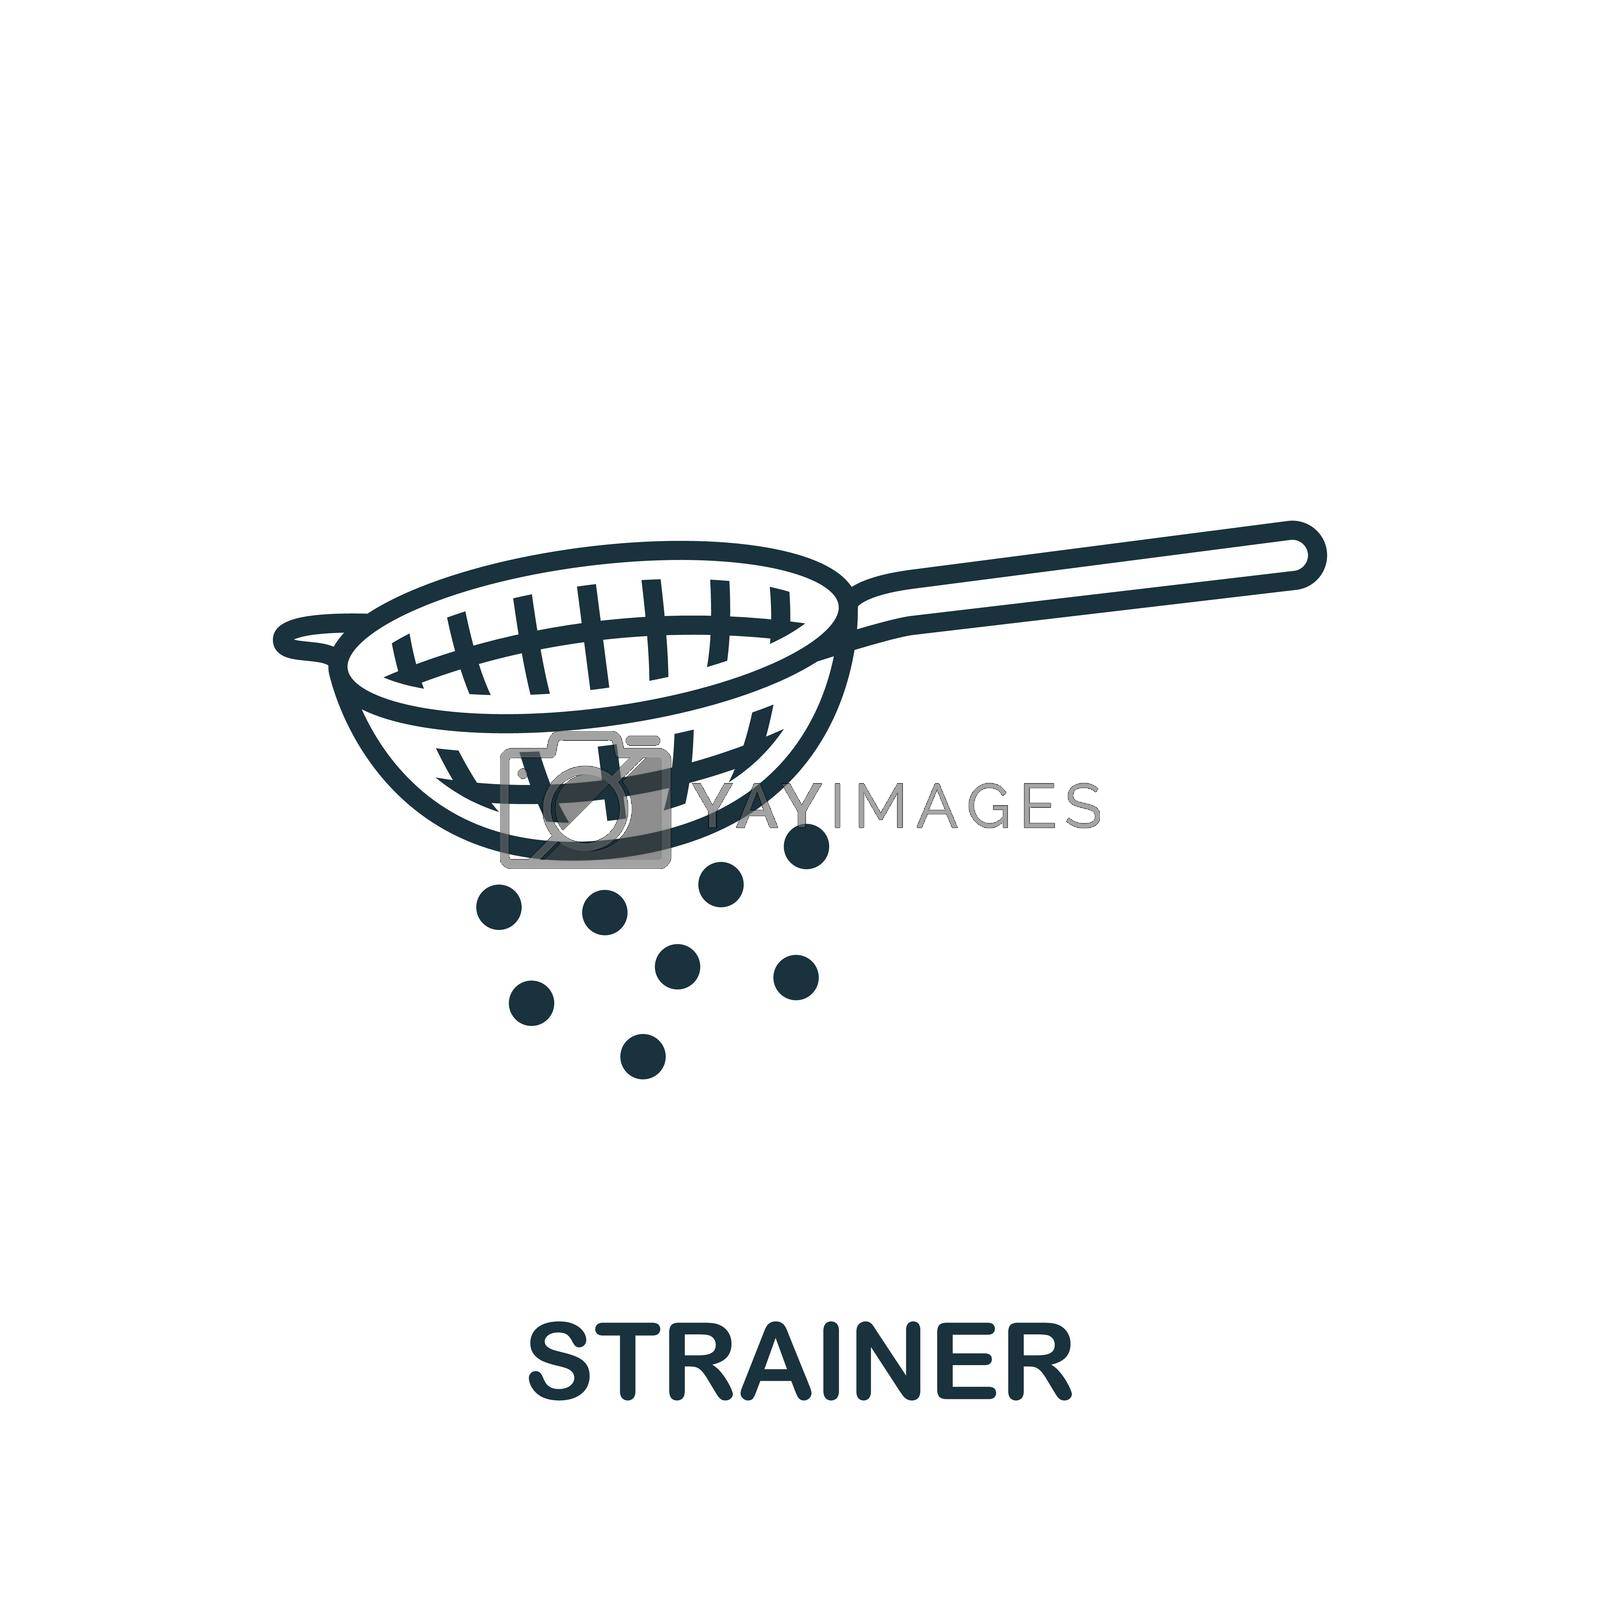 Royalty free image of Strainer icon. Monochrome simple Cooking icon for templates, web design and infographics by simakovavector